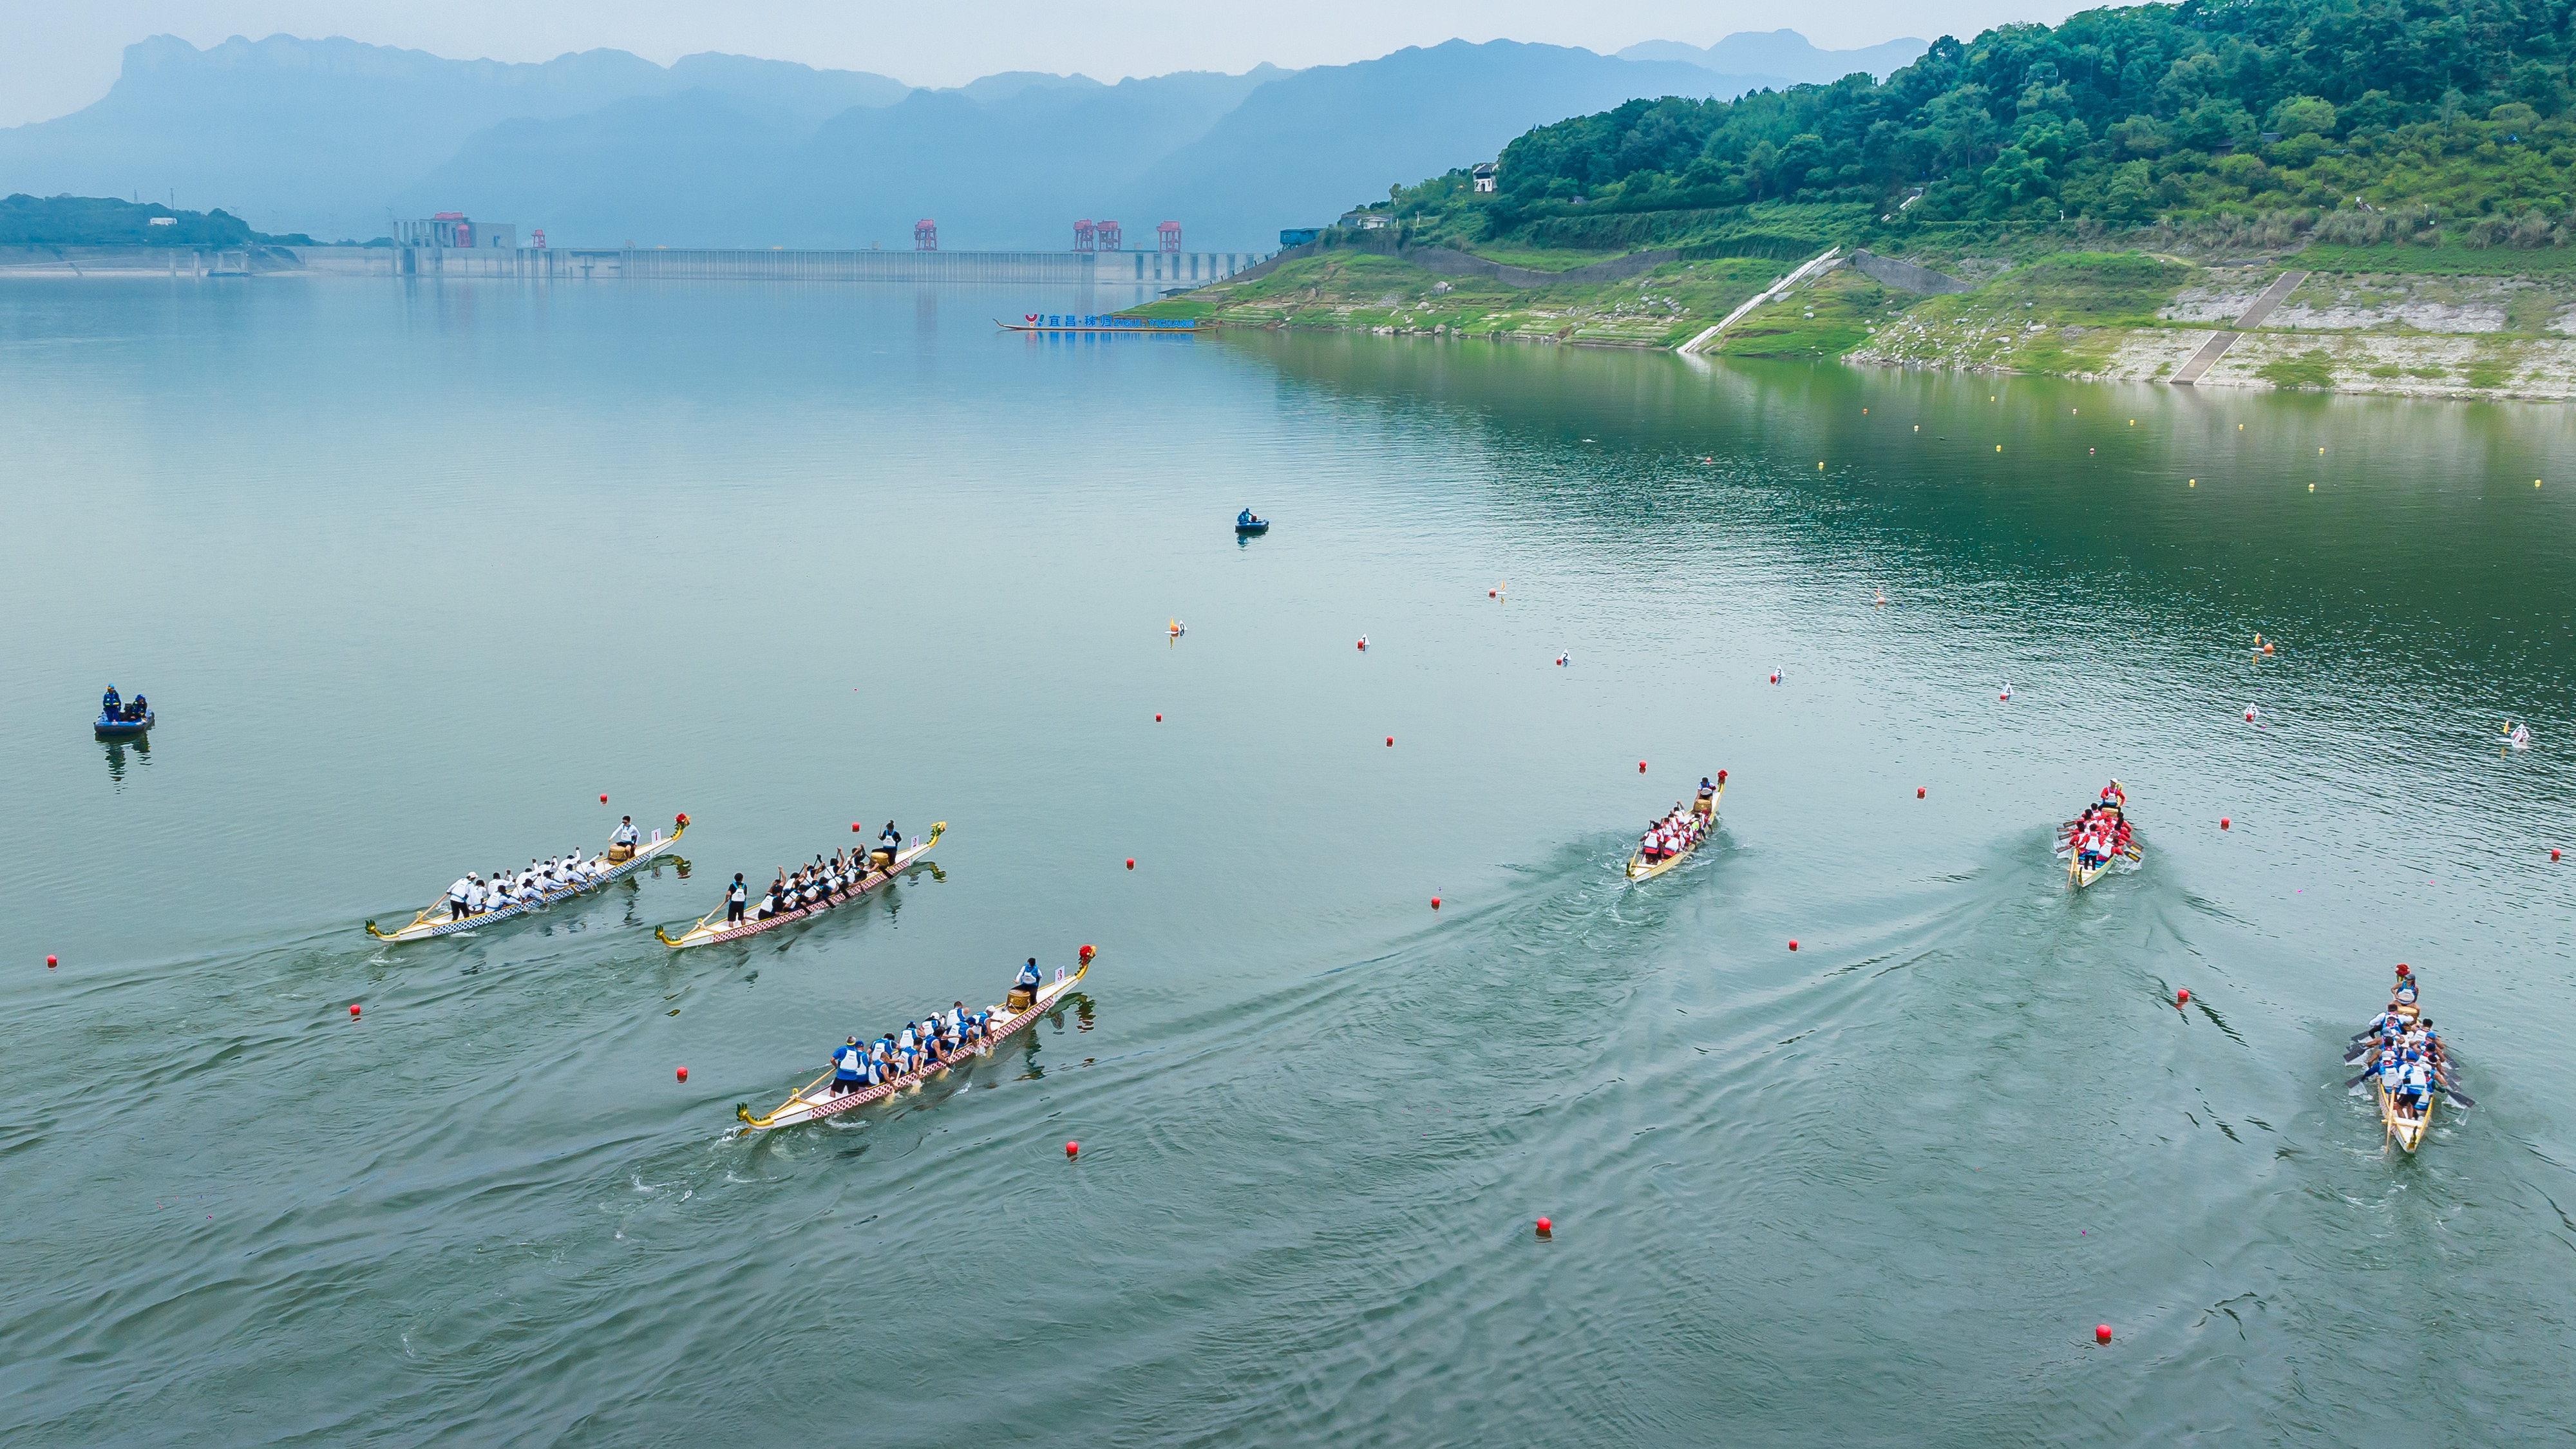 Live: ICF Dragon Boat World Cup in Zigui County of Yichang City, central China's Hubei Province